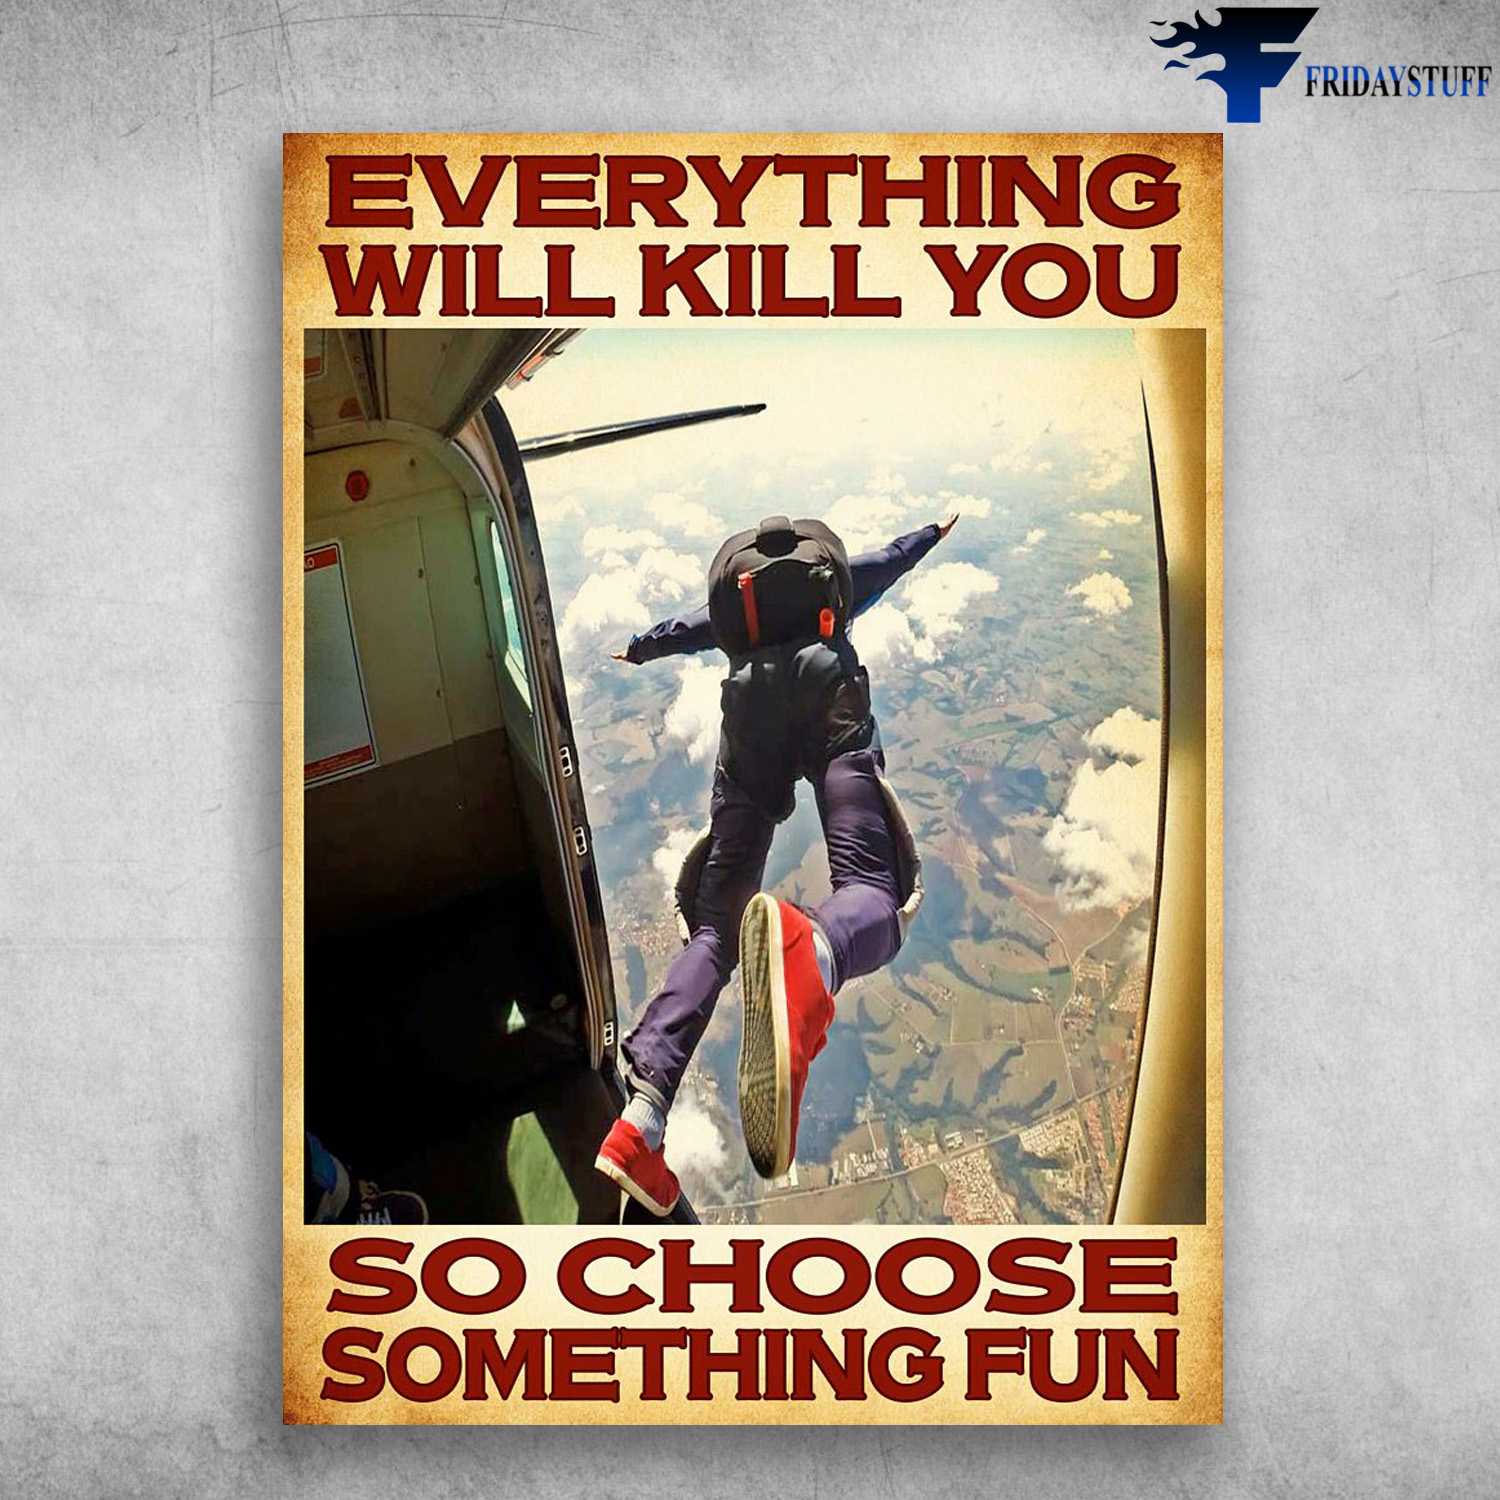 Skydiving Man, Skydiving Poster, Everything Will Kill You, So Choose Something Fun